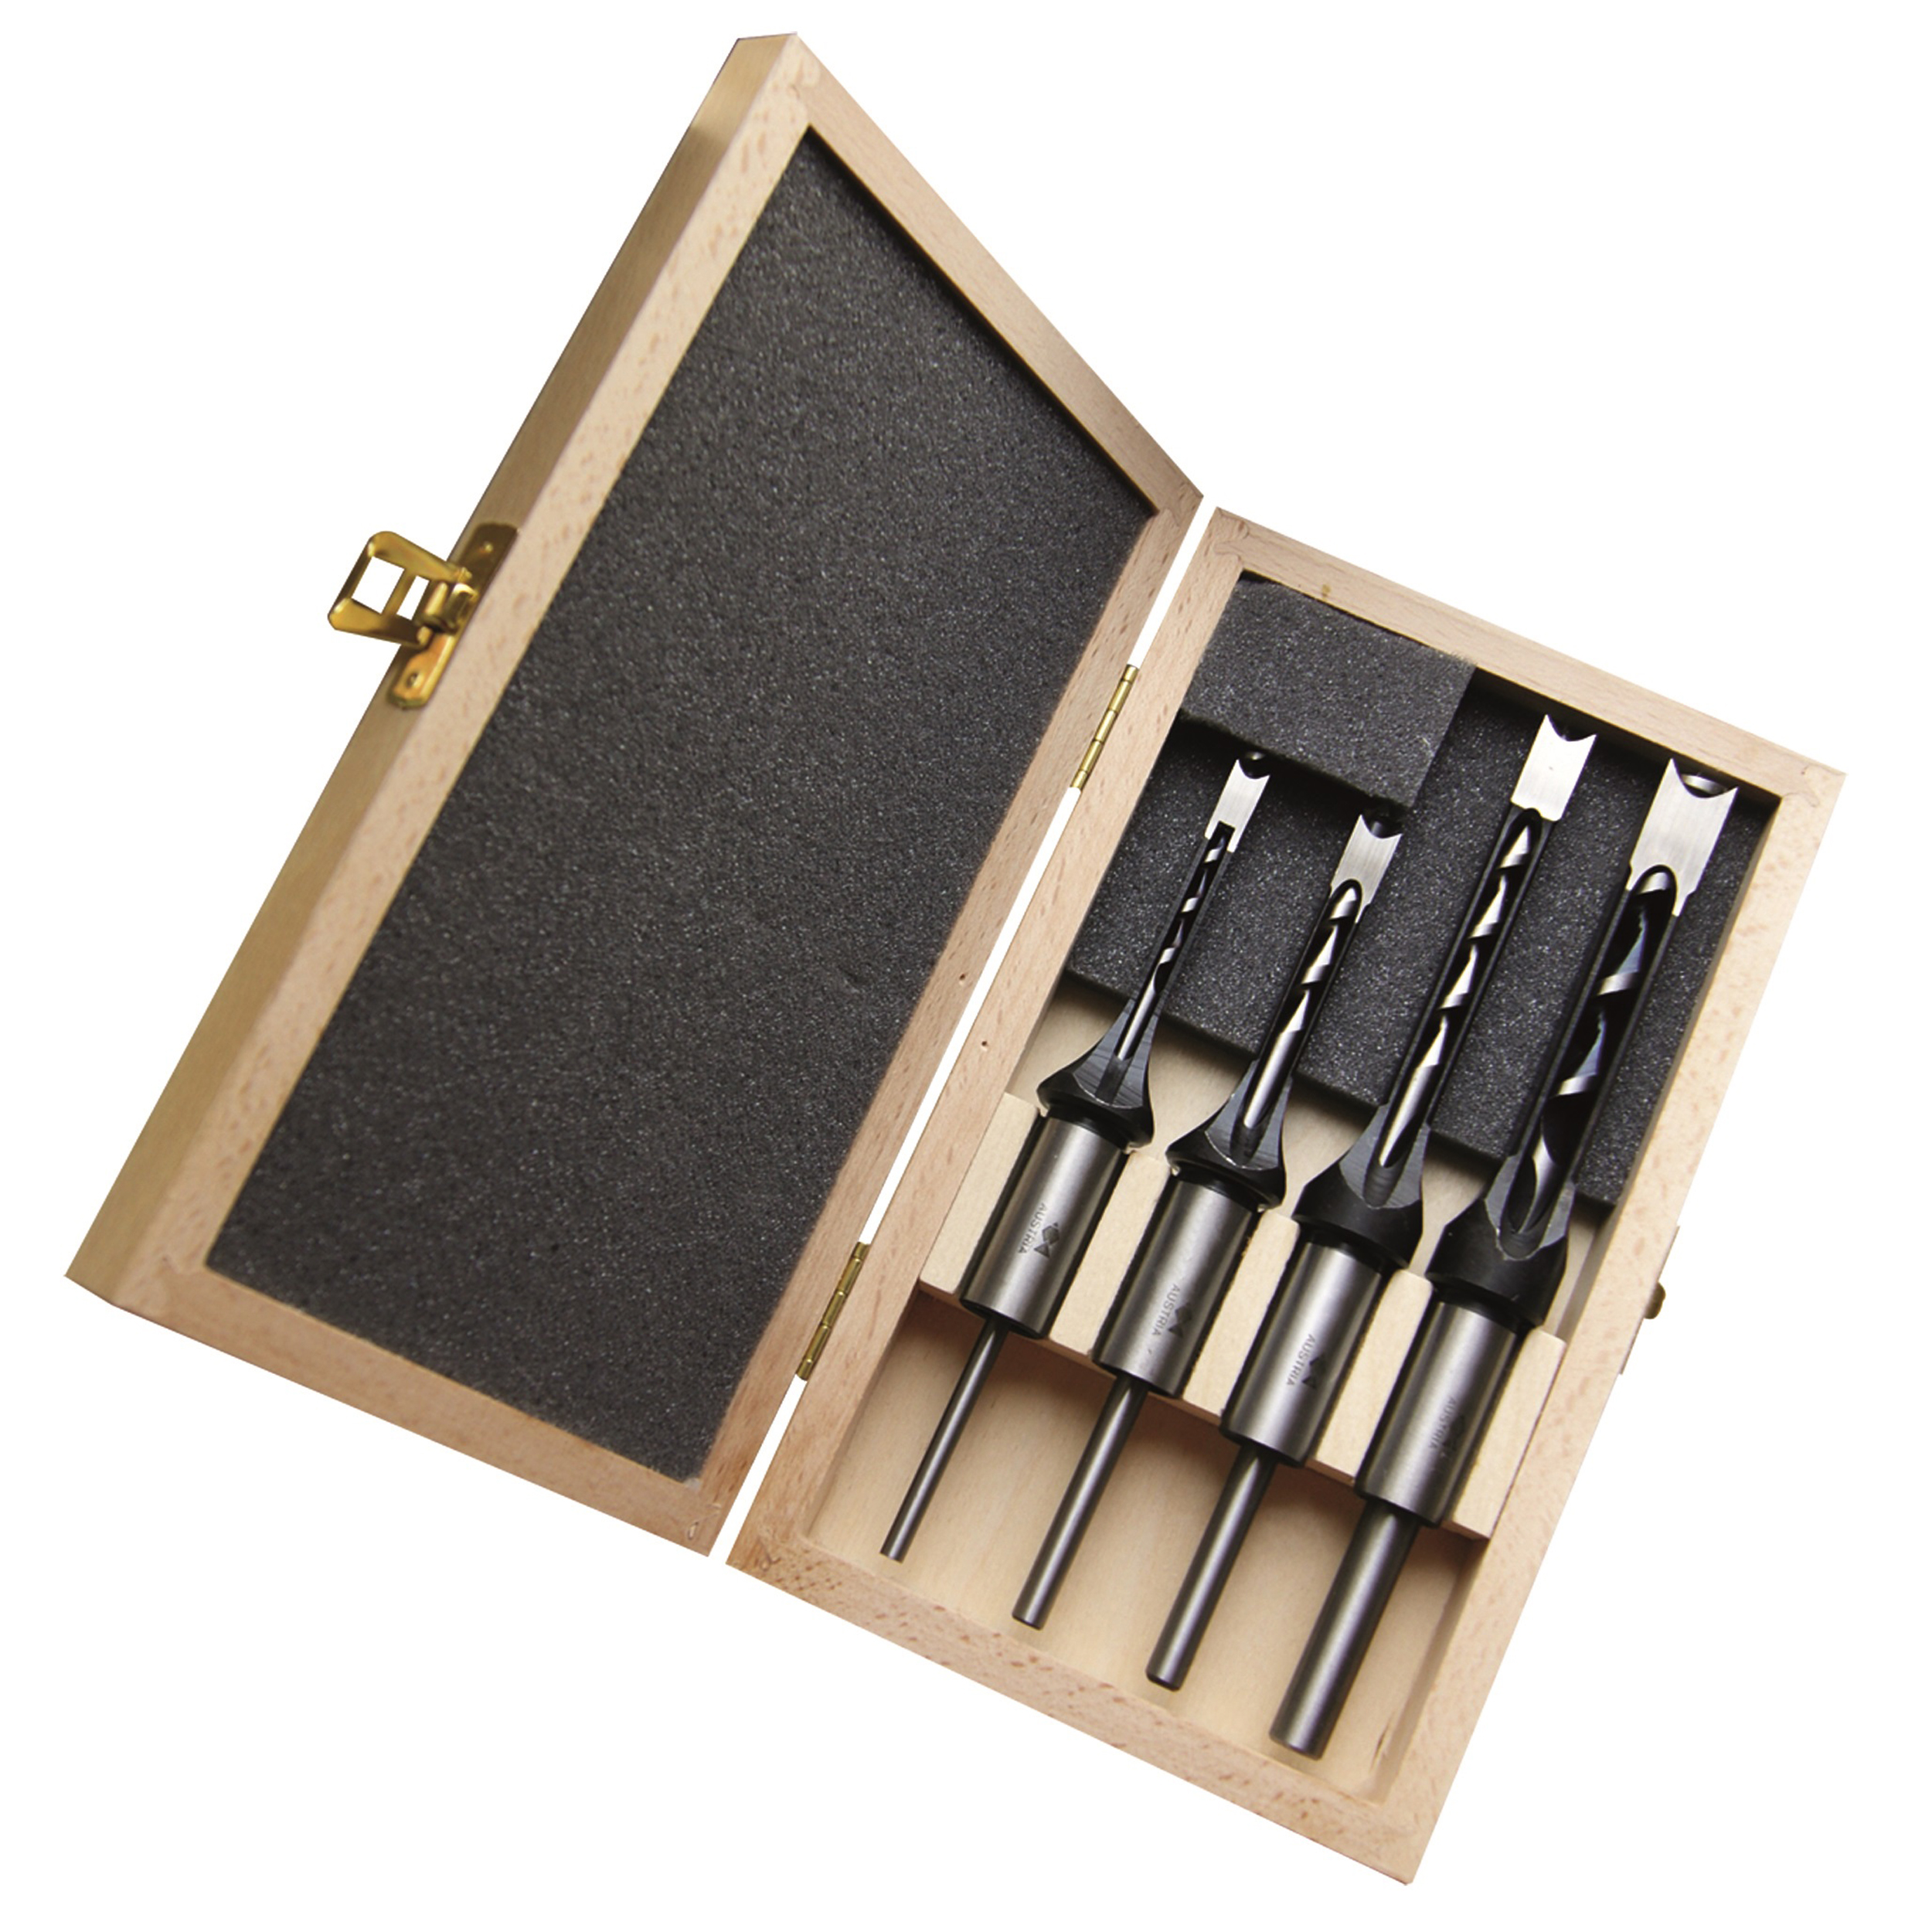 4-piece Mortise Chisel And Bit Set In Wooden Box, 1/4", 5/16", 3/8" And 1/2" D